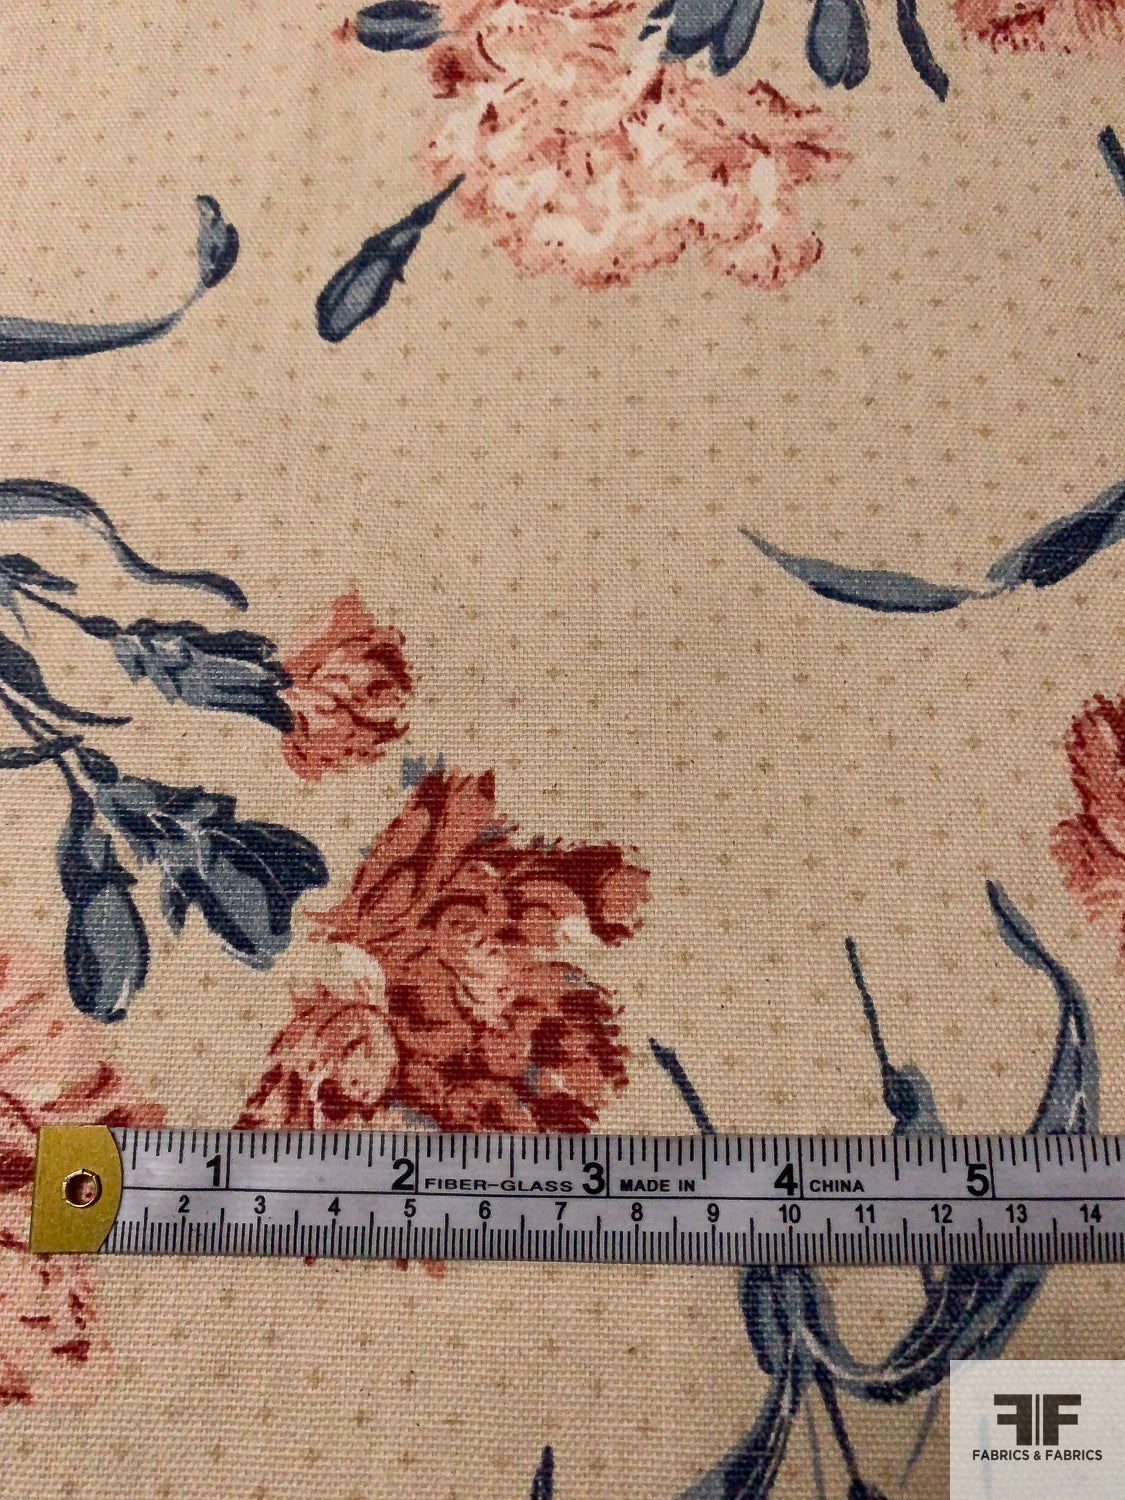 Floral Printed Cotton Canvas - Beige / Dusty Blue / Dusty Coral